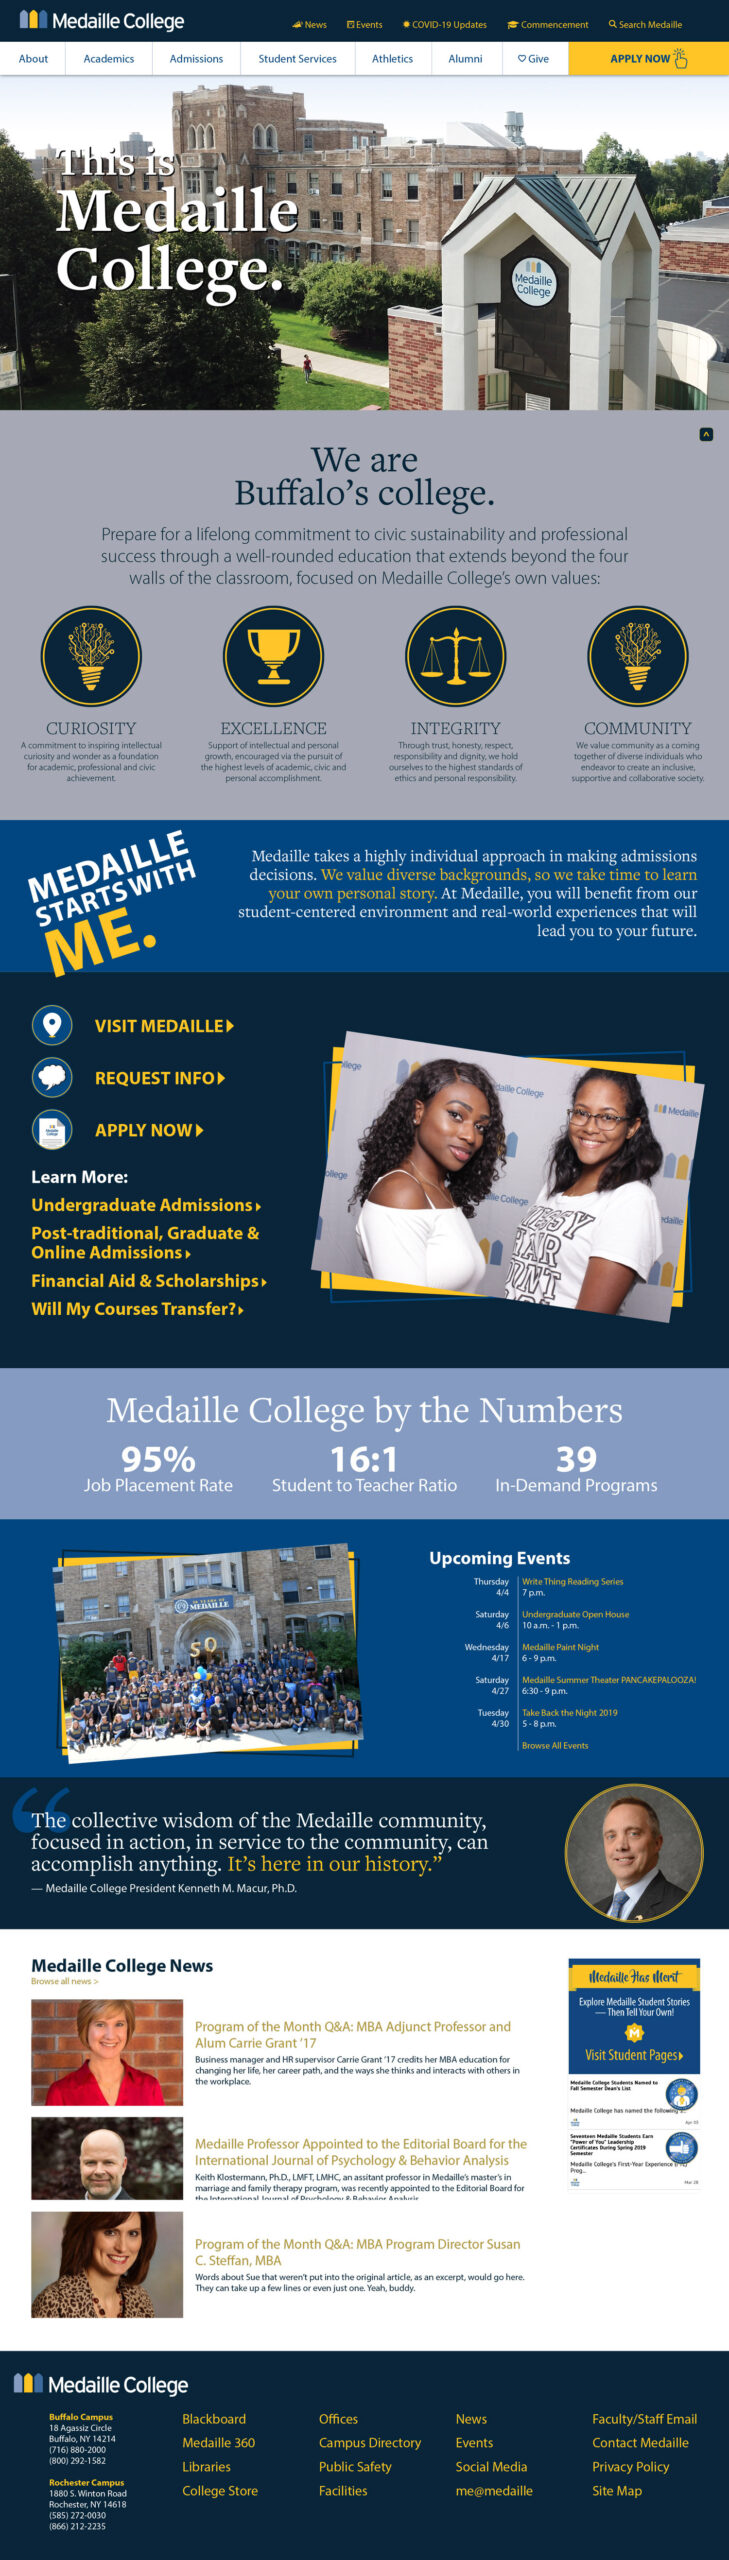 Medaille College Homepage Redesign Mockup 2018